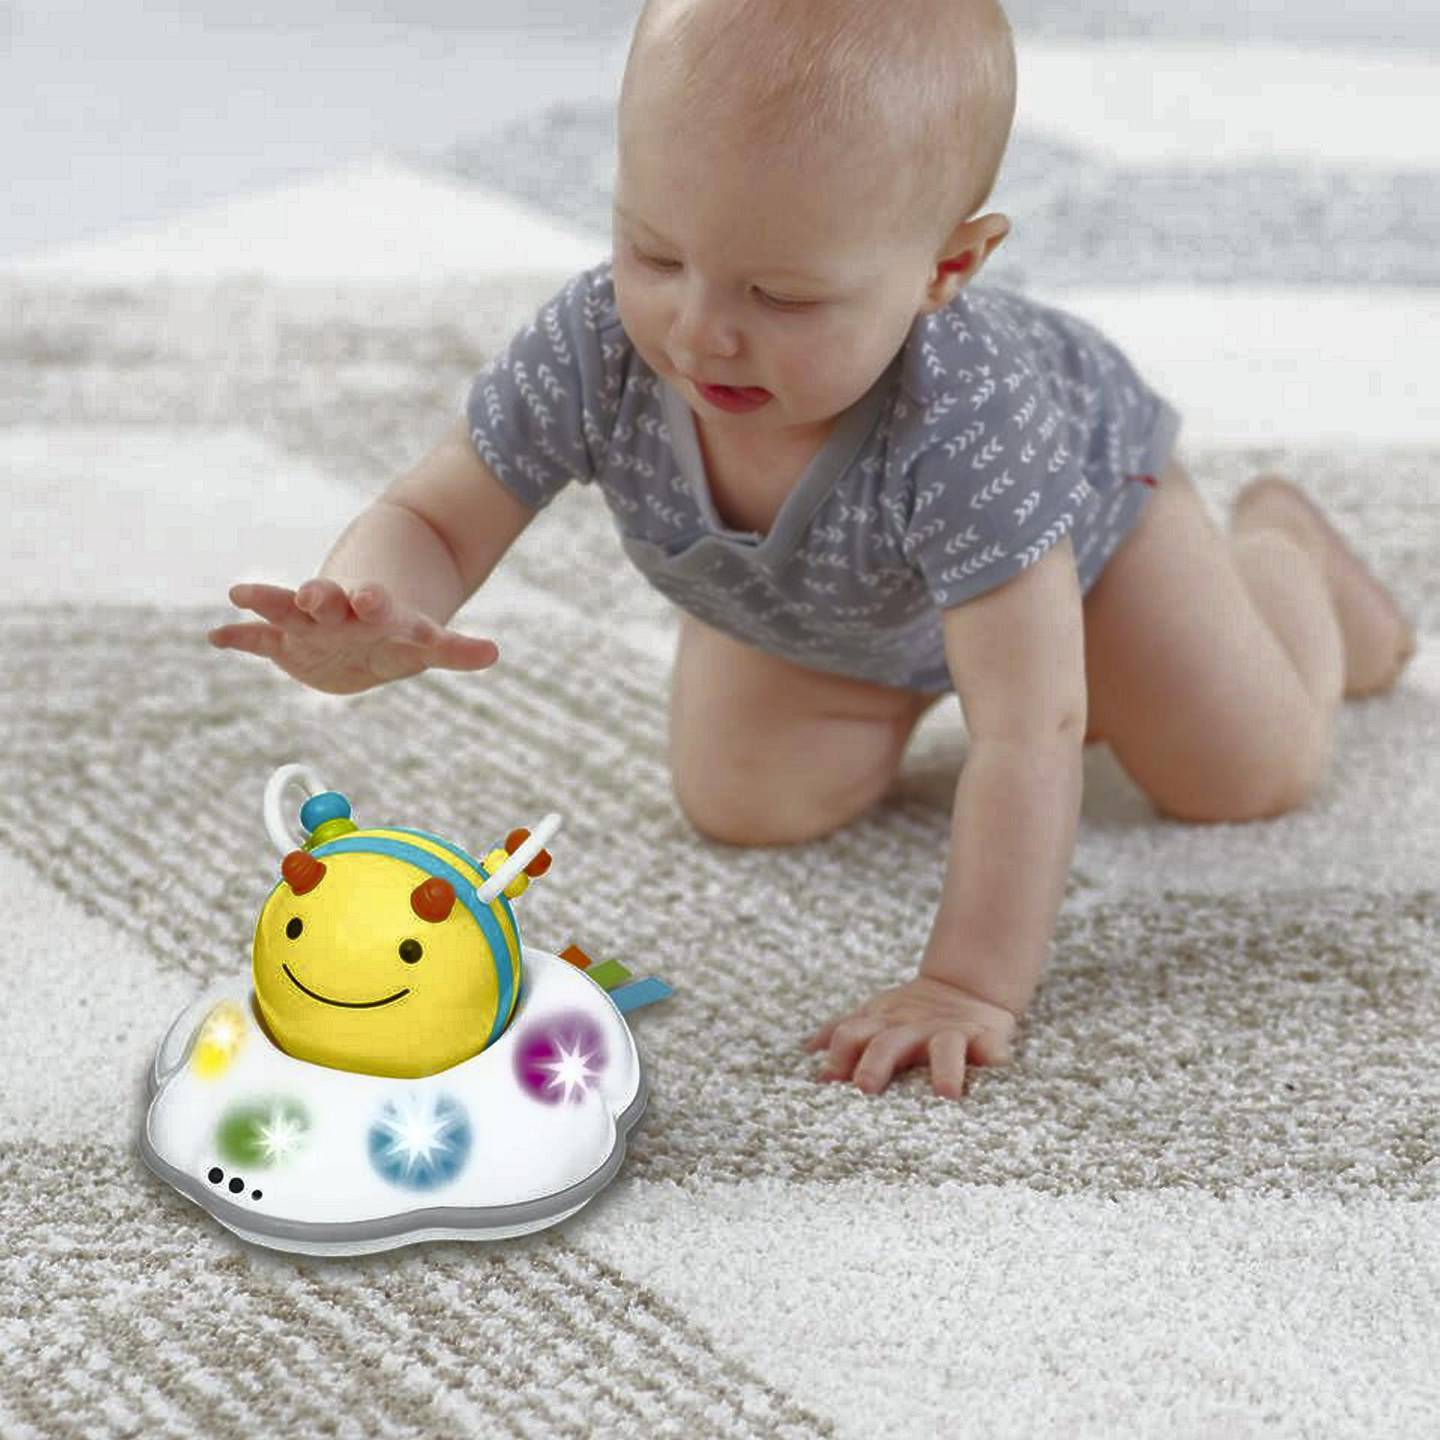 Some babies begin crawling between 6 and 9 months, and are able to grasp objects. Courtesy Babysouq